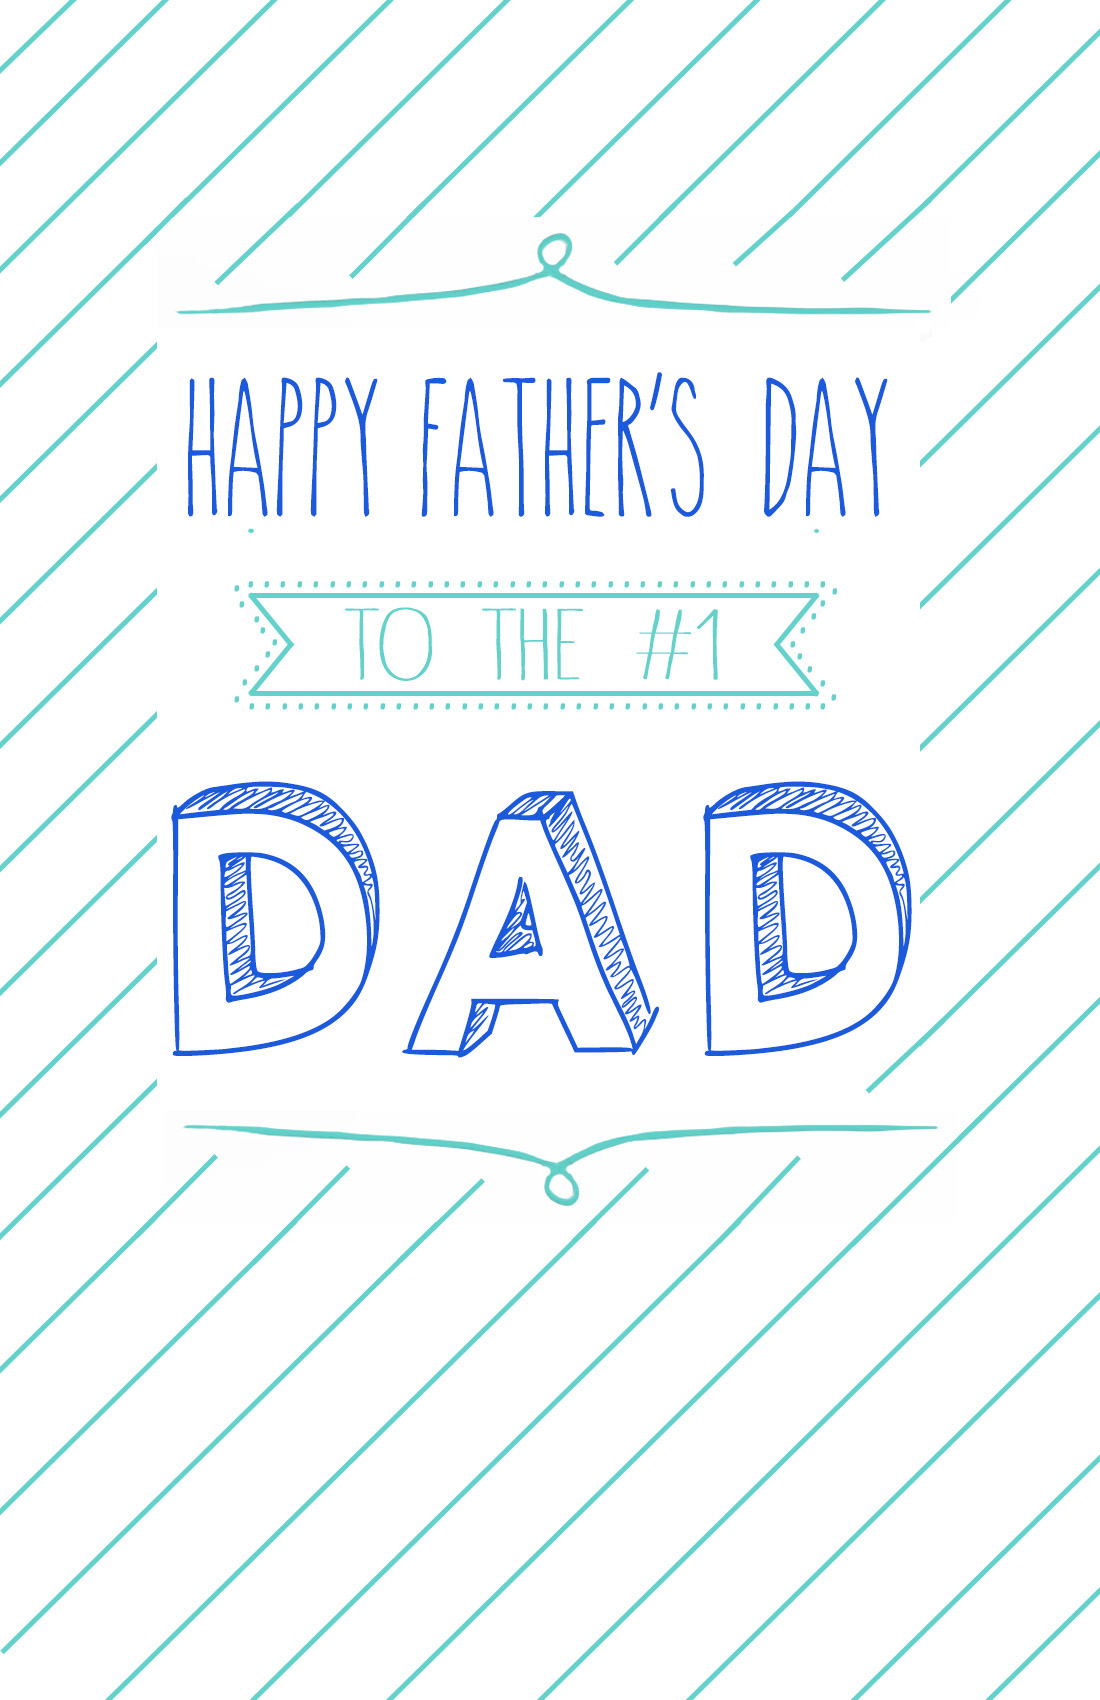 Fathers Day Cards Printable Latest News Update